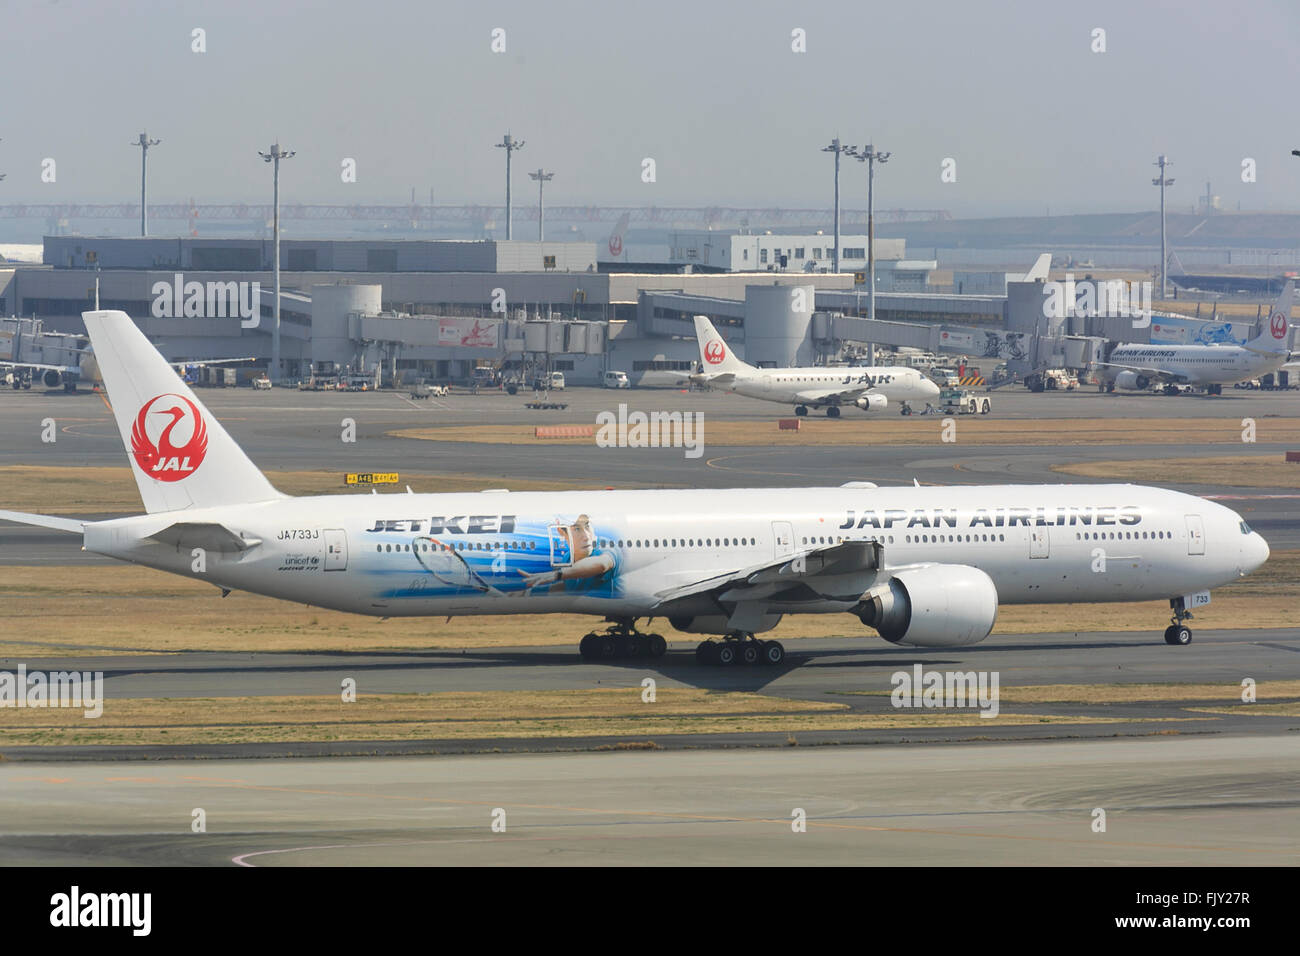 Japan Airlines (JAL) aircraft JET-KEI on the tarmac at Tokyo International Airport on March 4, 2016, Tokyo, Japan. The special aircraft JET-KEI (JL043) made its inaugural flight sending off Japanese National Tennis team including star player Kei Nishikori, whose image is featured on the Boeing 777-300ER craft, from Haneda to London Heathrow for the upcoming Davis Cup beginning March 4th. © Rodrigo Reyes Marin/AFLO/Alamy Live News Stock Photo